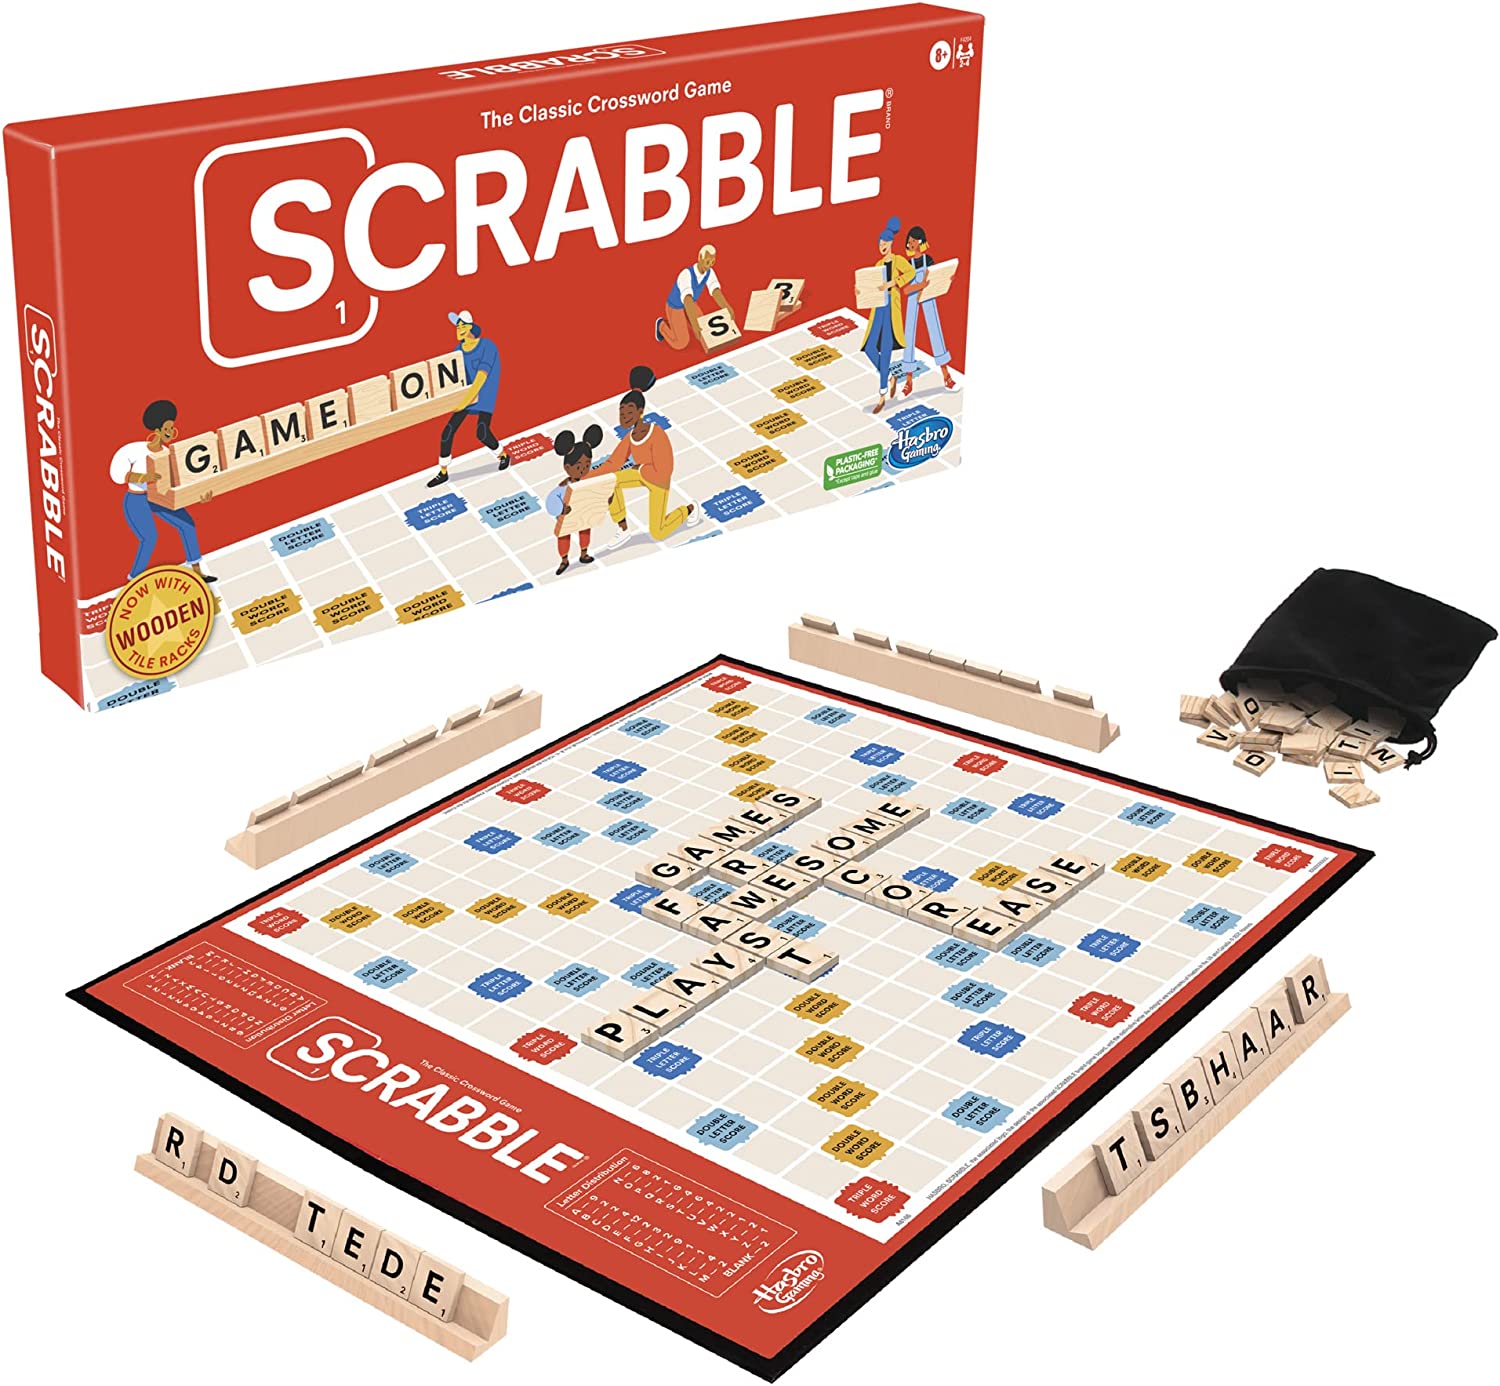 Must-Try Educational Board Games for Your Family